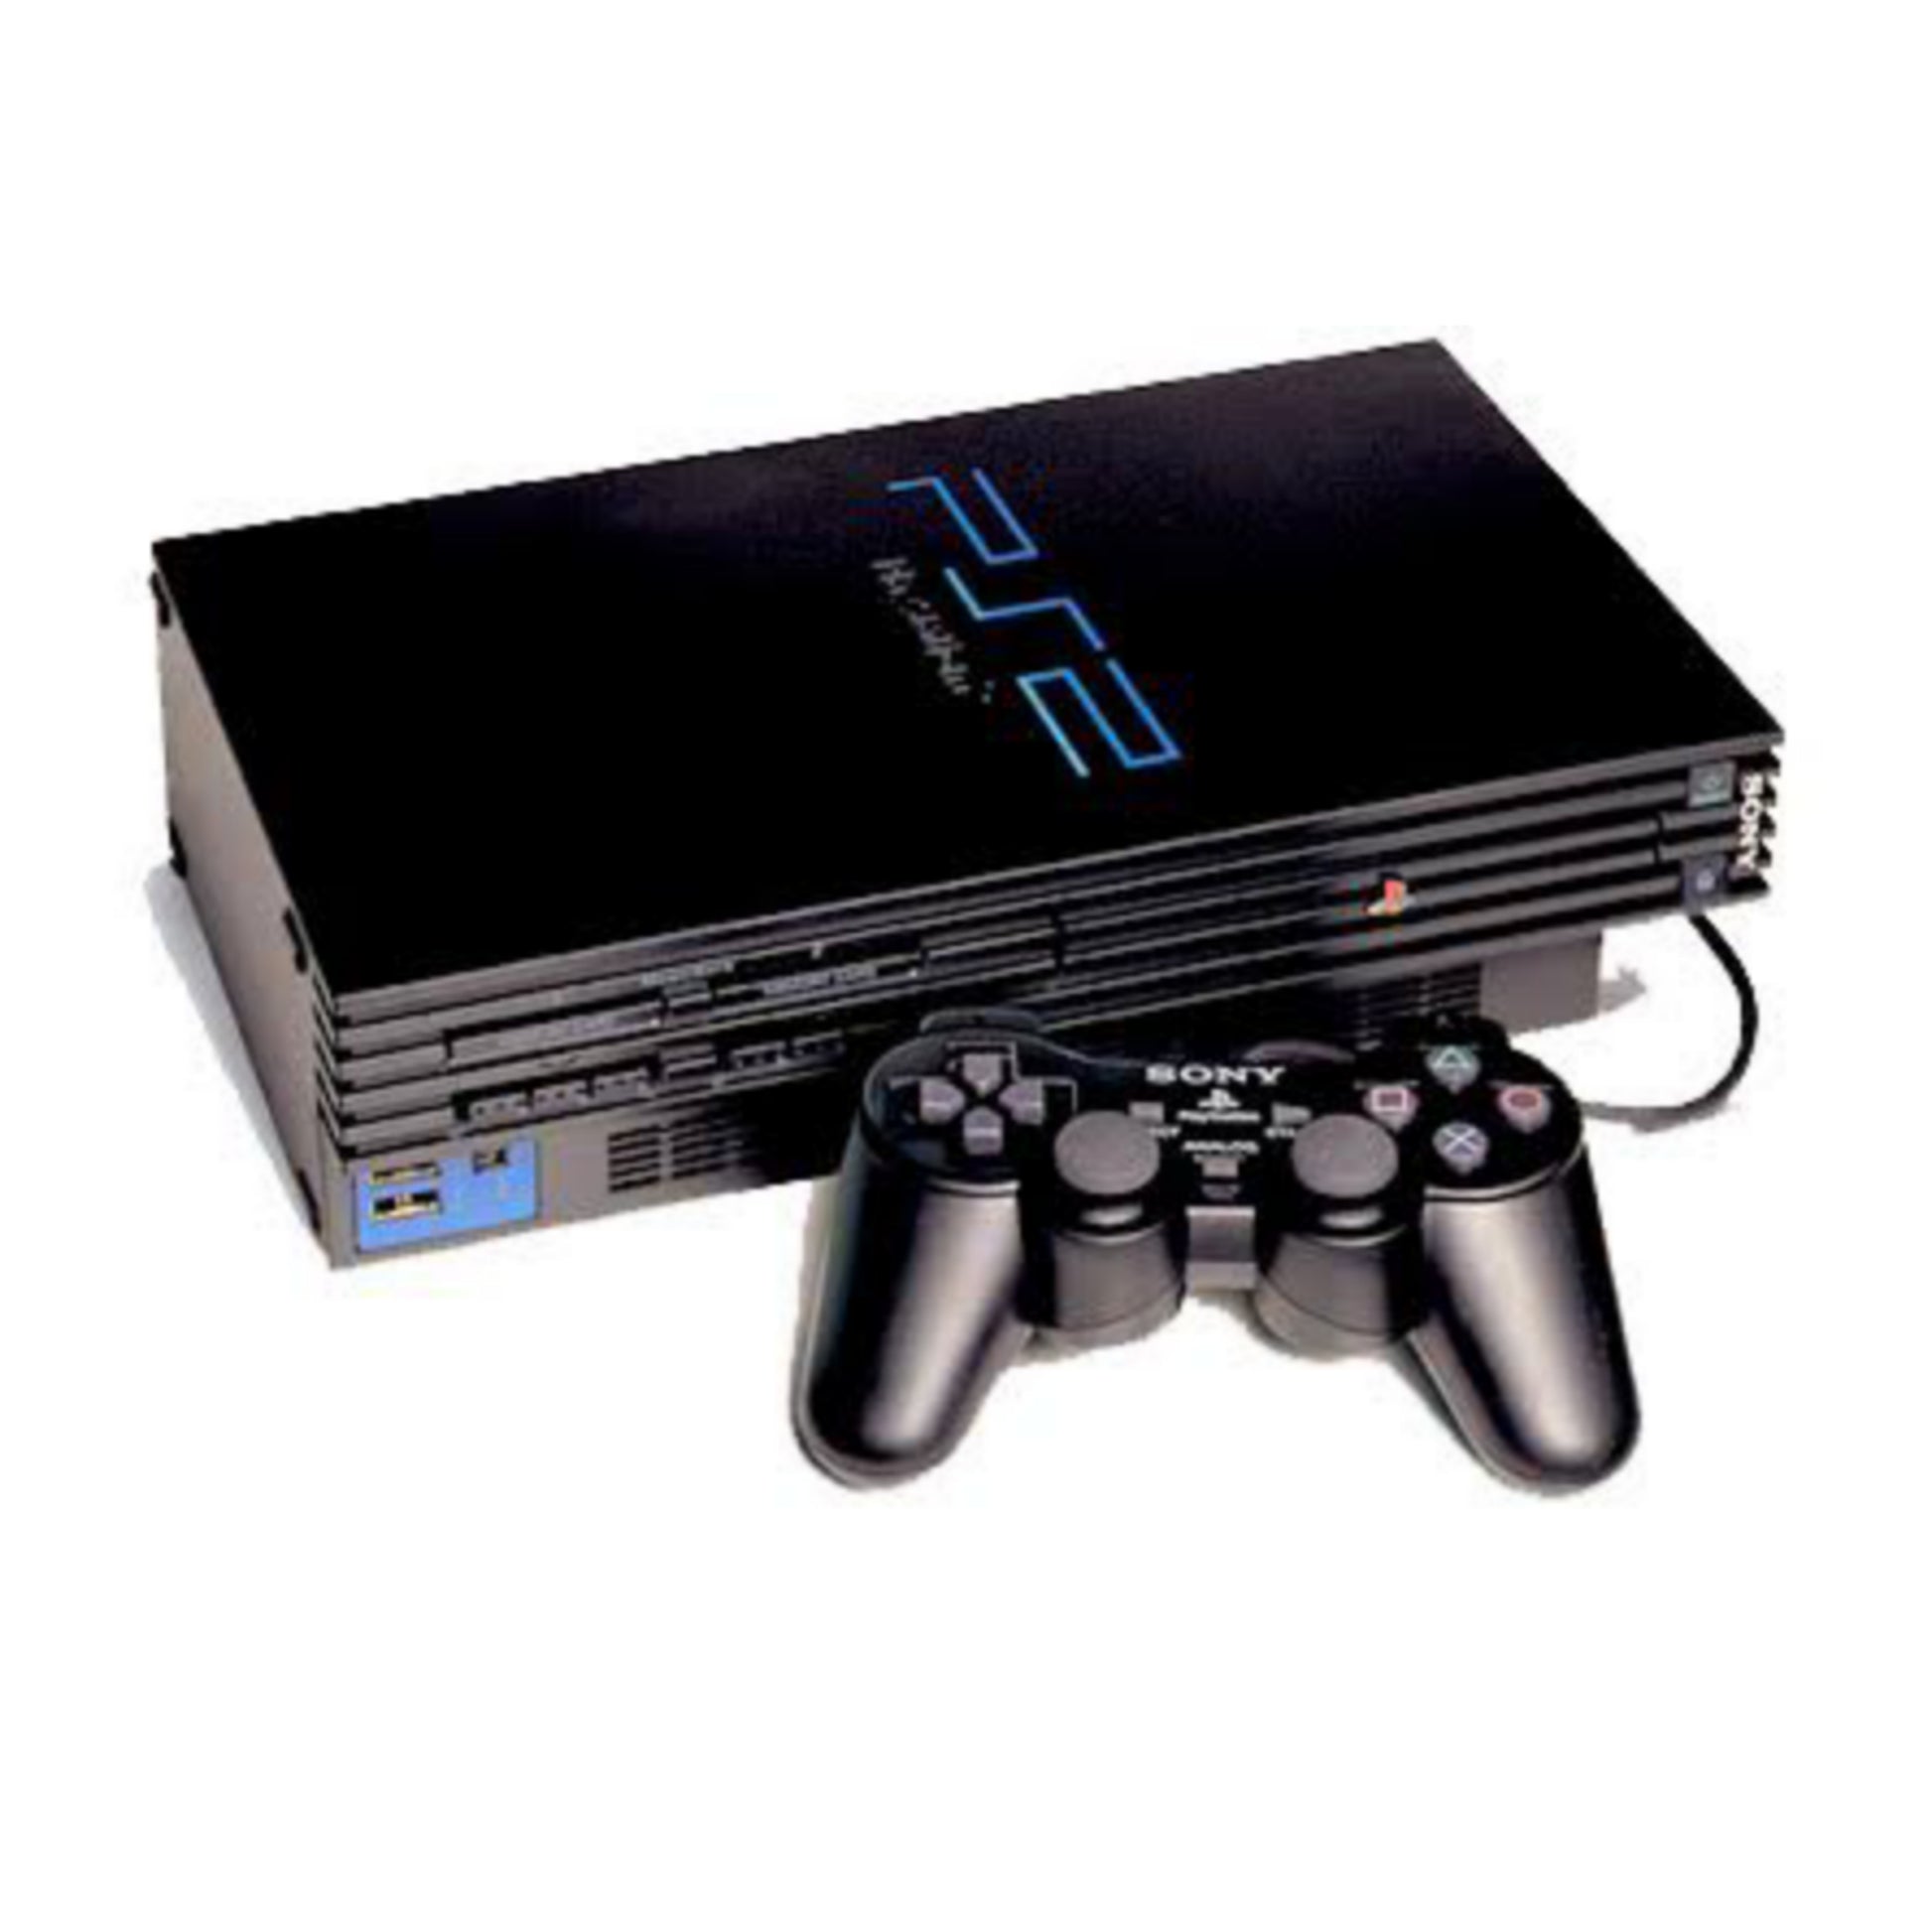 UK Used PS2 (Sony Playstation 2) Game Console Complete Set